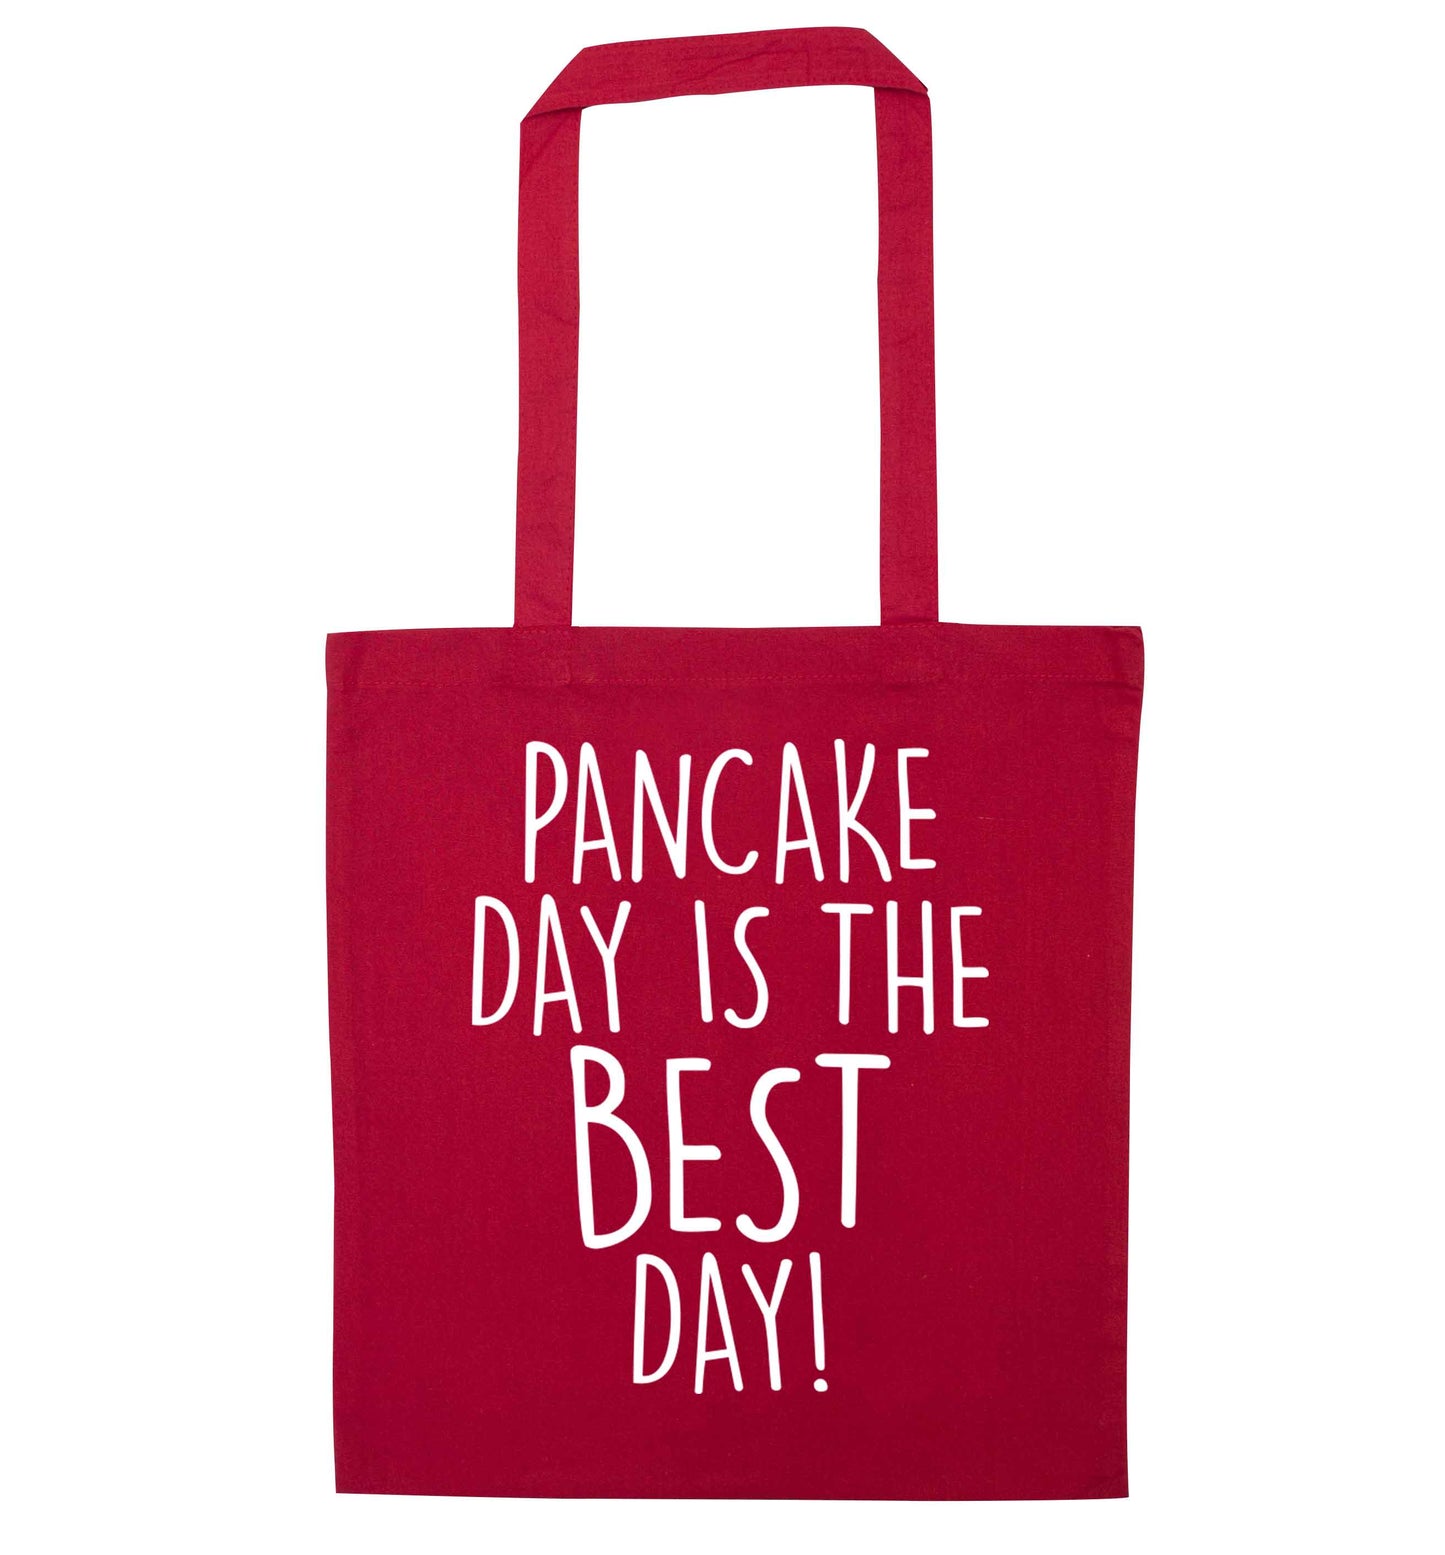 Pancake day is the best day red tote bag